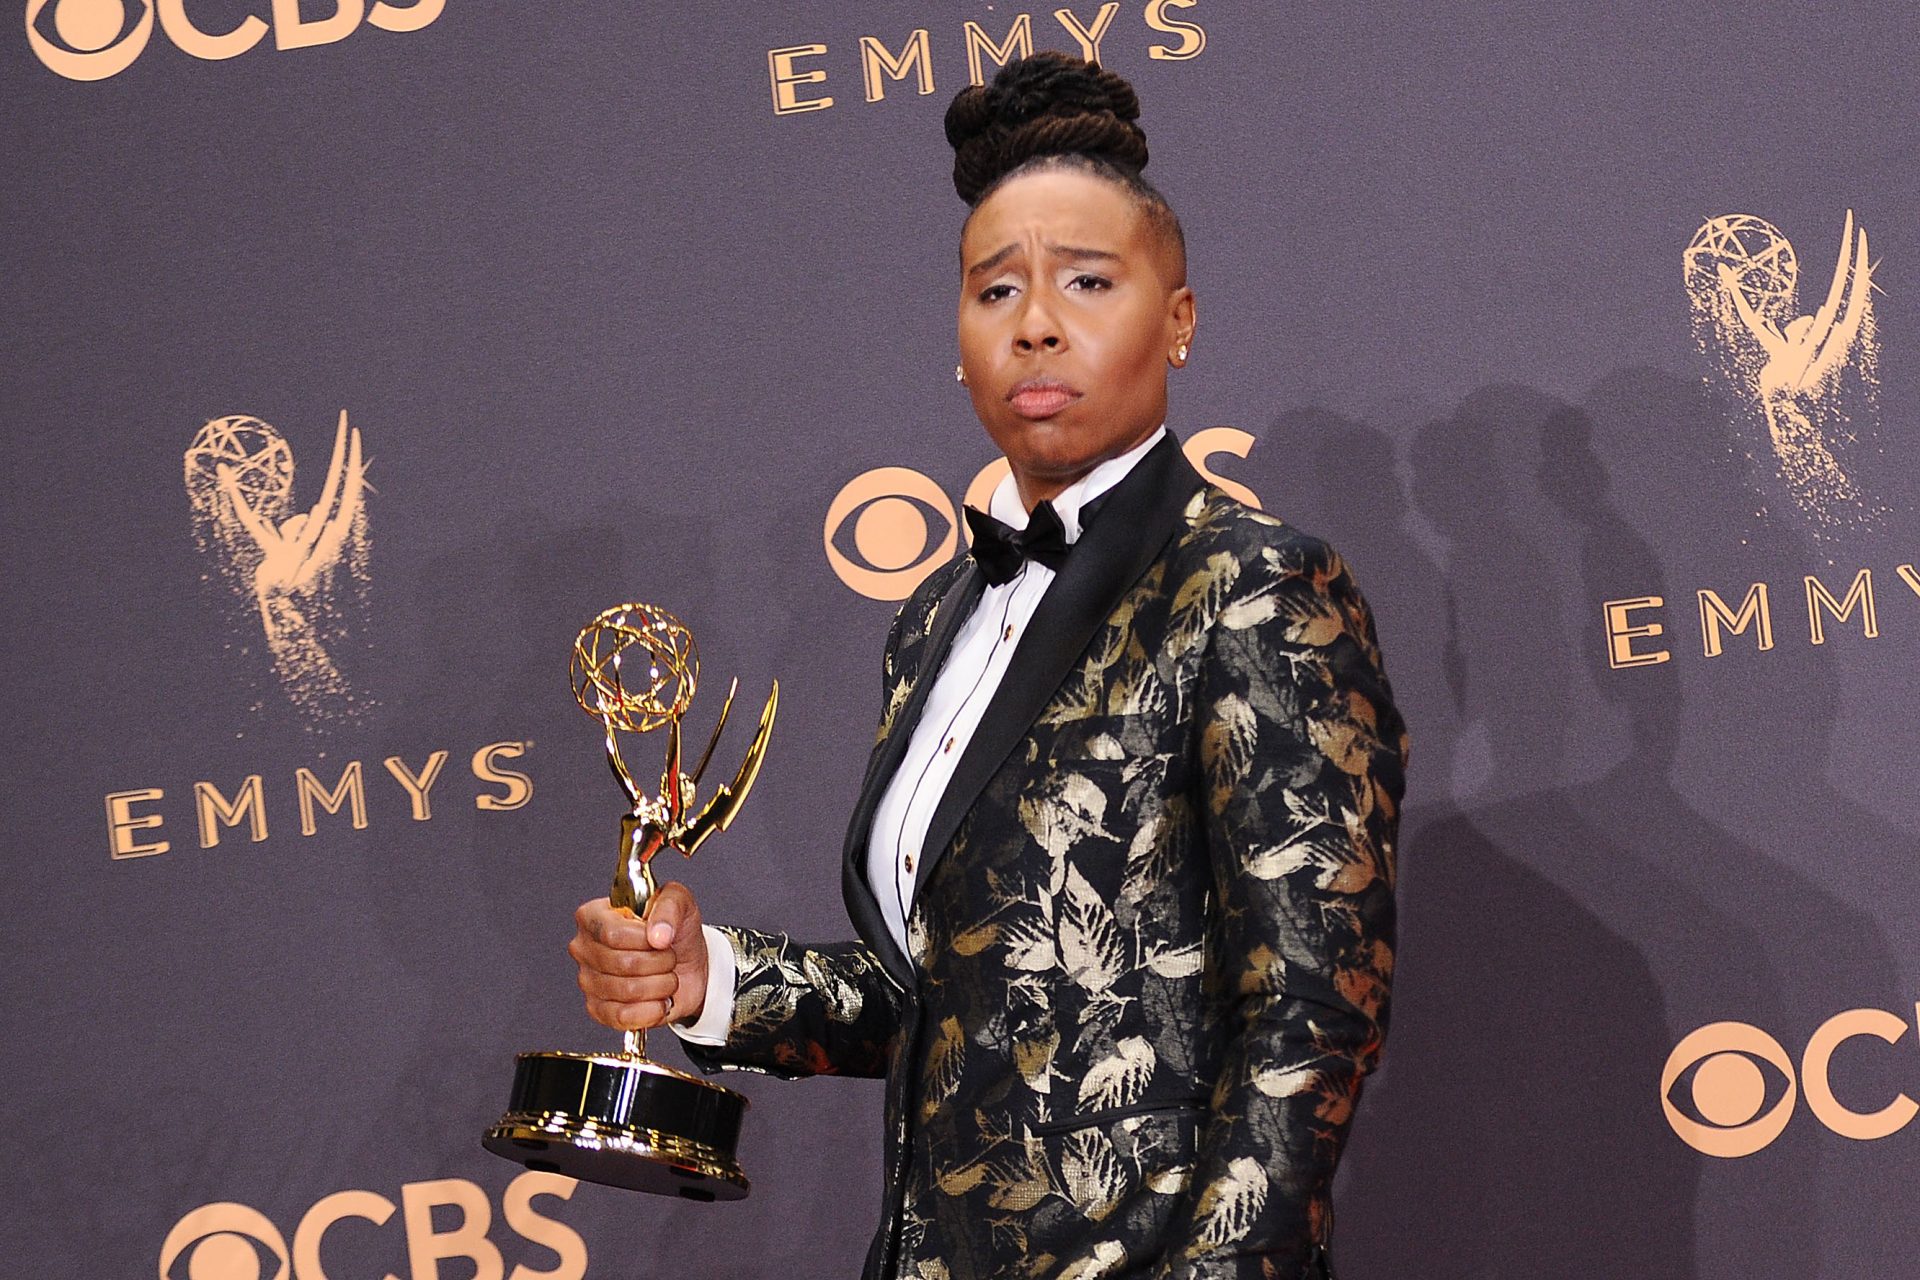 Lena Waithe Faces Backlash Over Scenes of Graphic, Racist Violence in ‘Them’